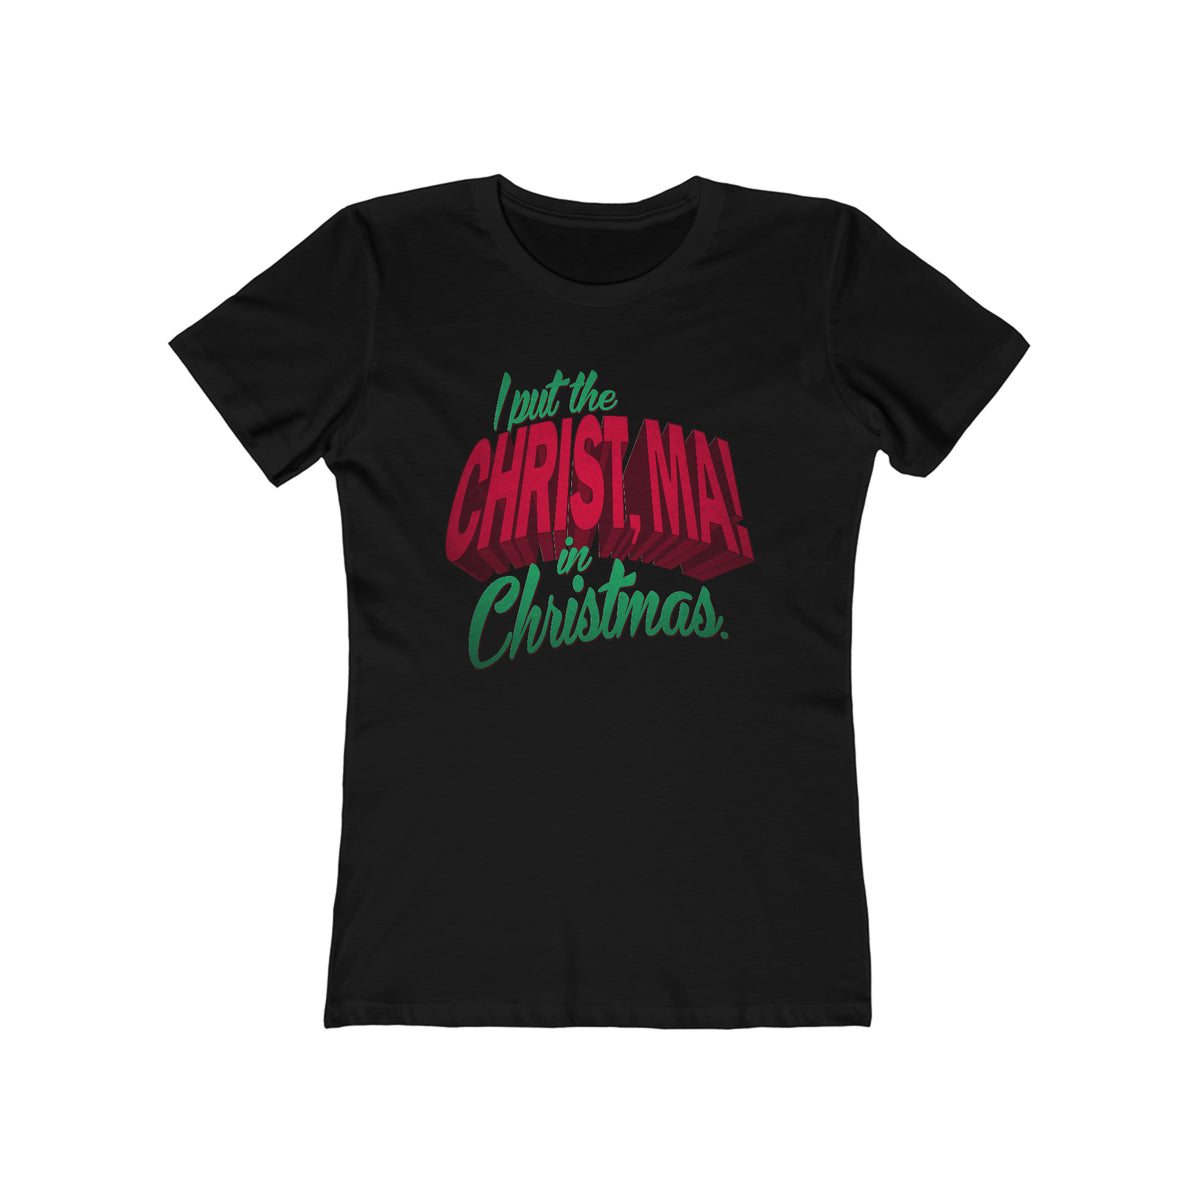 I Put The Christ Ma! In Christmas. - Women’s T-Shirt